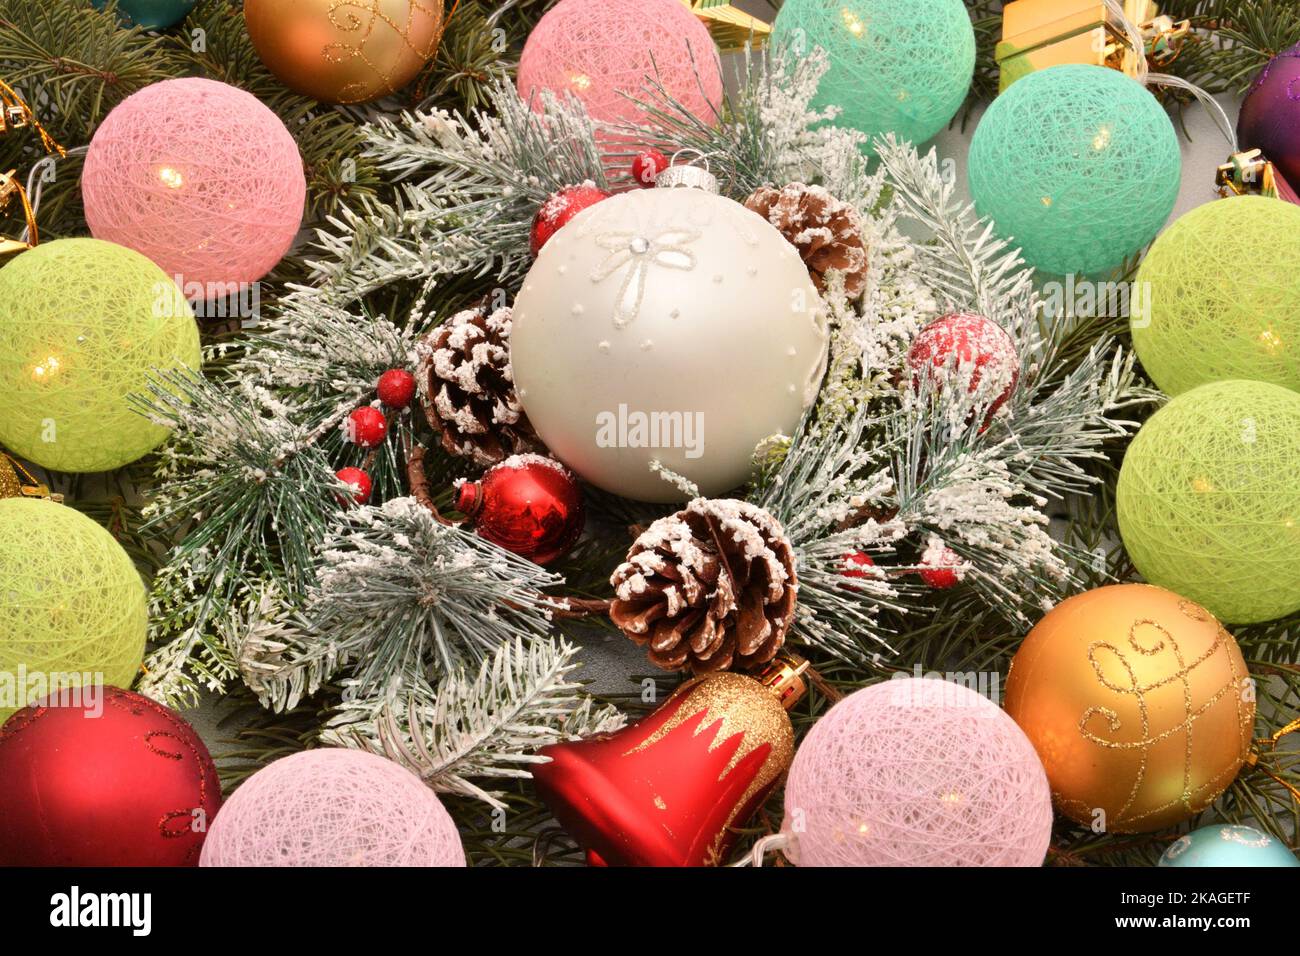 Colorful Christmas garland and decorative decorations for the Christmas tree Stock Photo